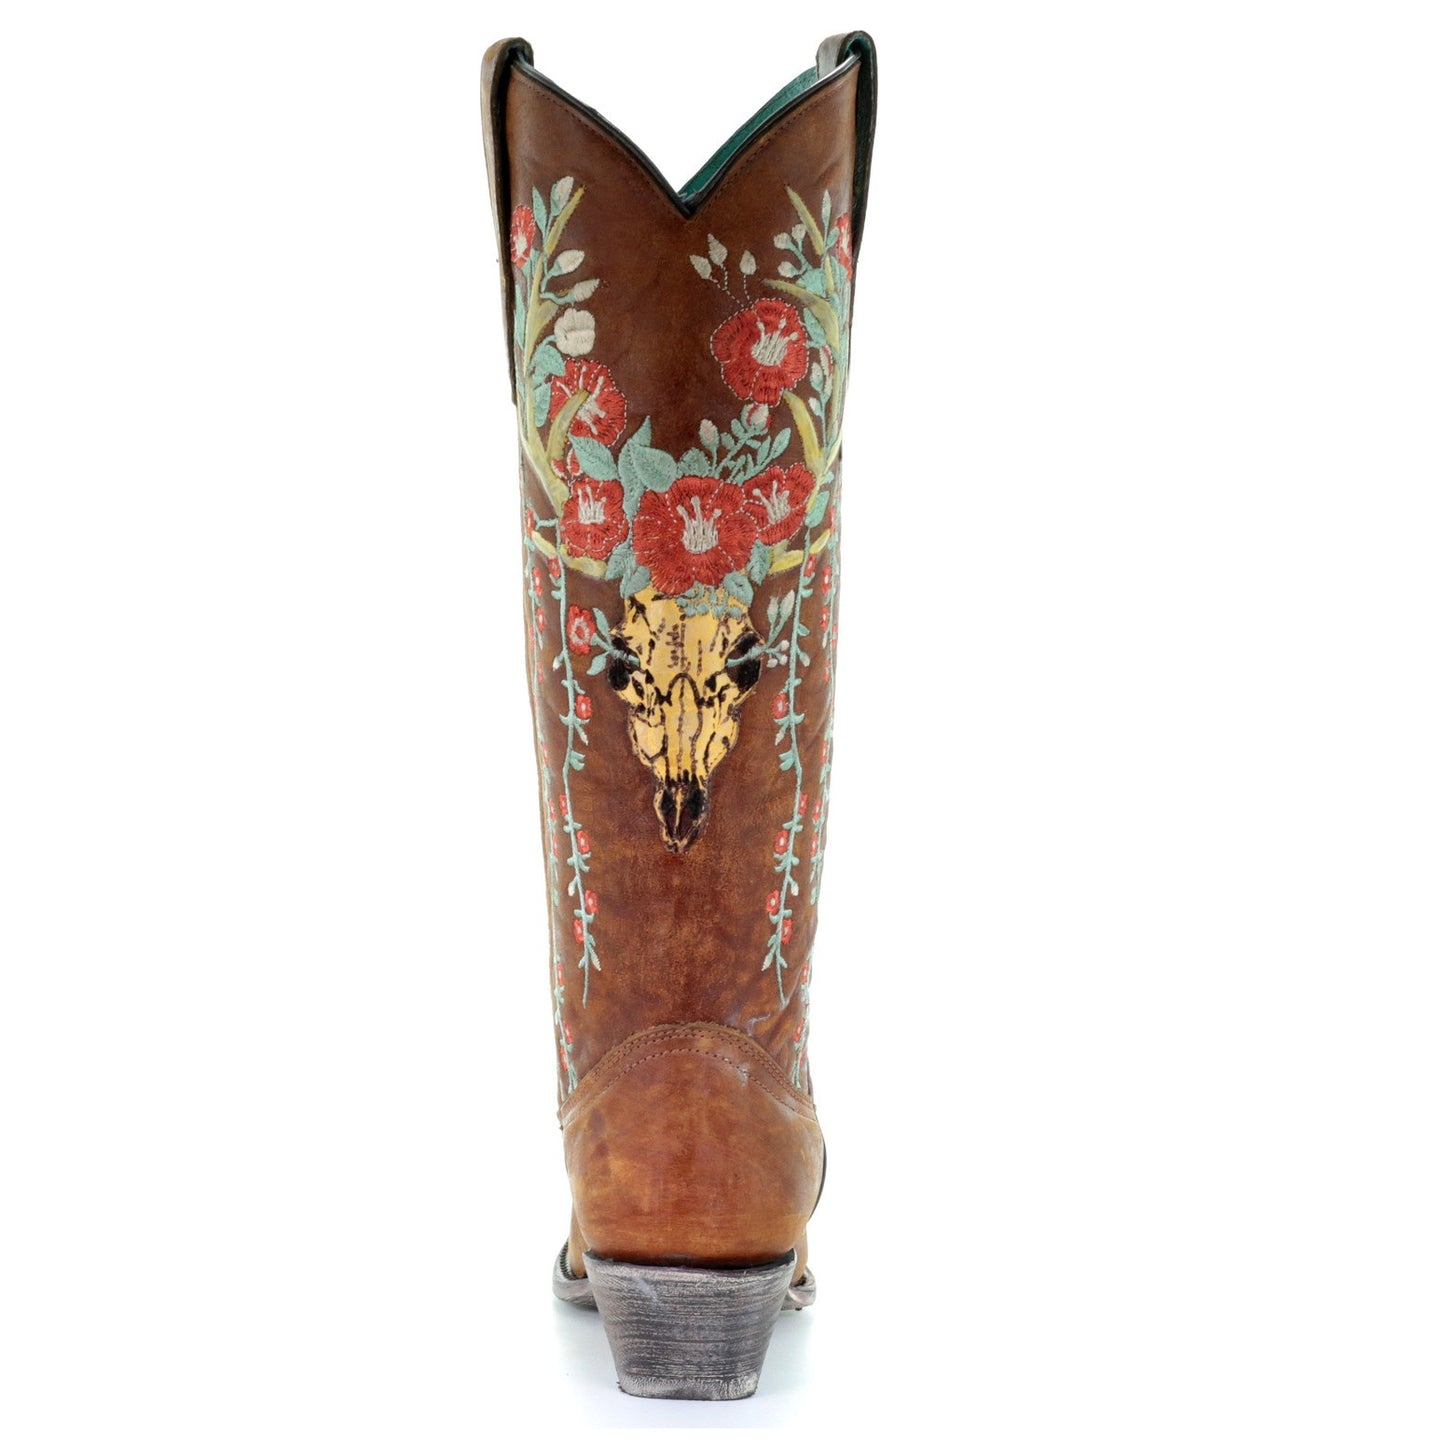 Corral Ladies Tan Deer Skull Overlay & Floral Embroidery Boots A3620 - Wild West Boot Store